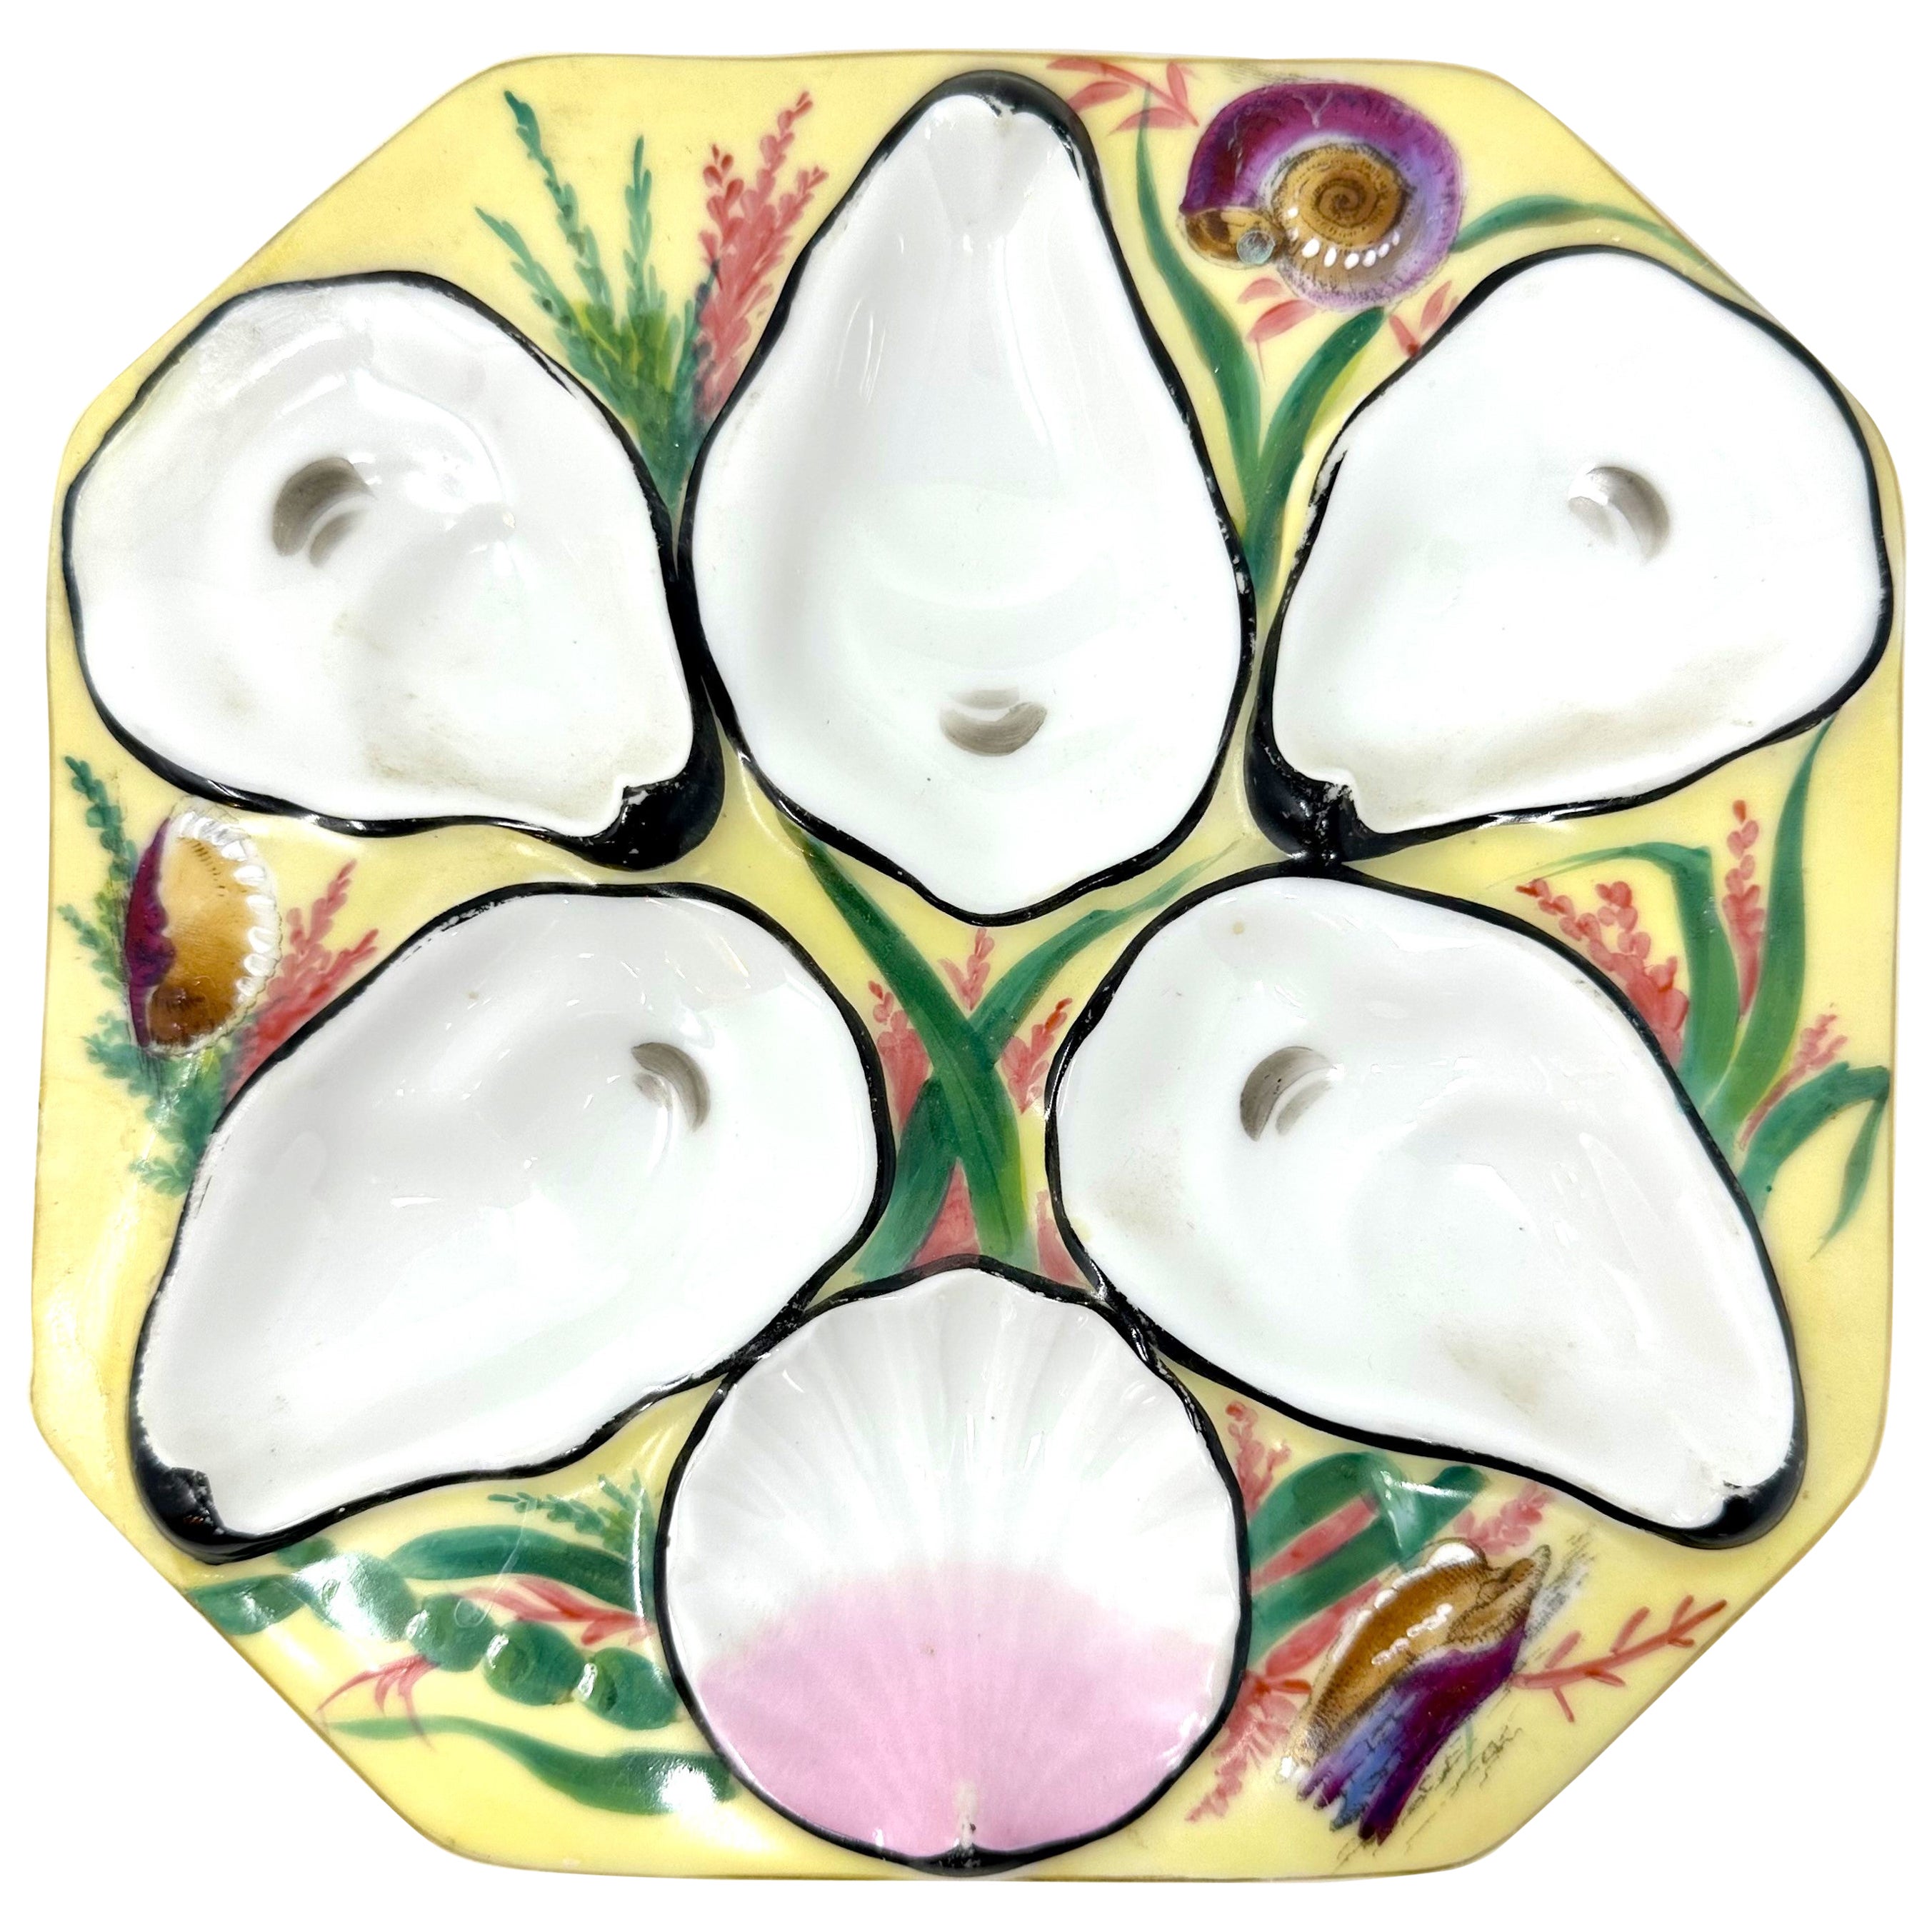 Antique French Limoges Porcelain Yellow Oyster Plate, Circa 1880-1890.